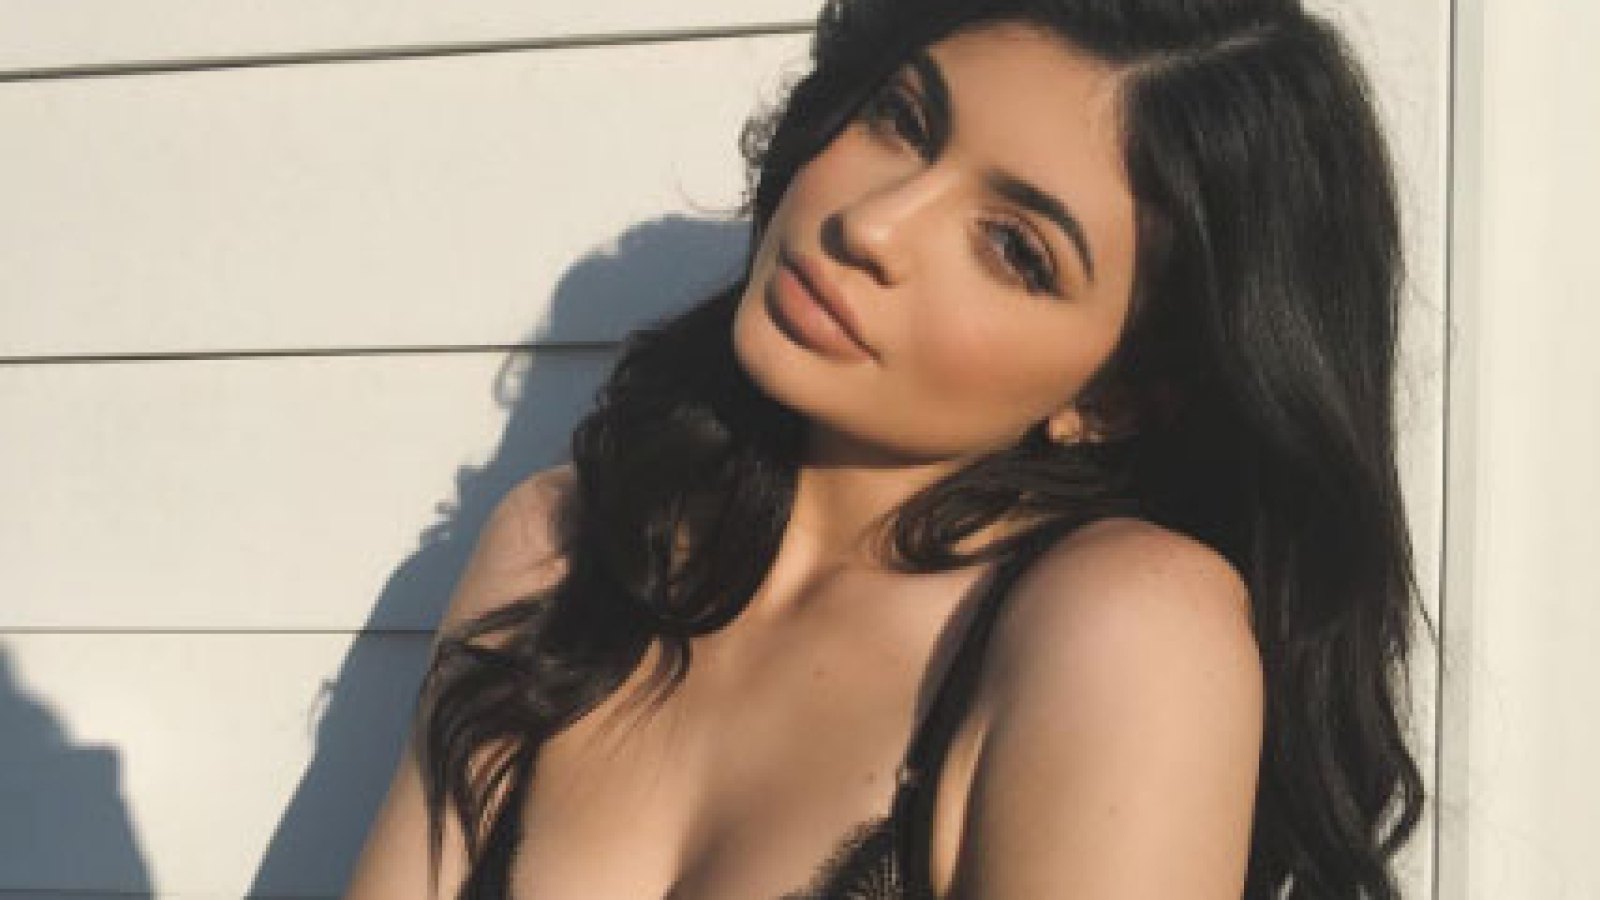 Kylie Jenner shows off her cleavage in a black lacy bra